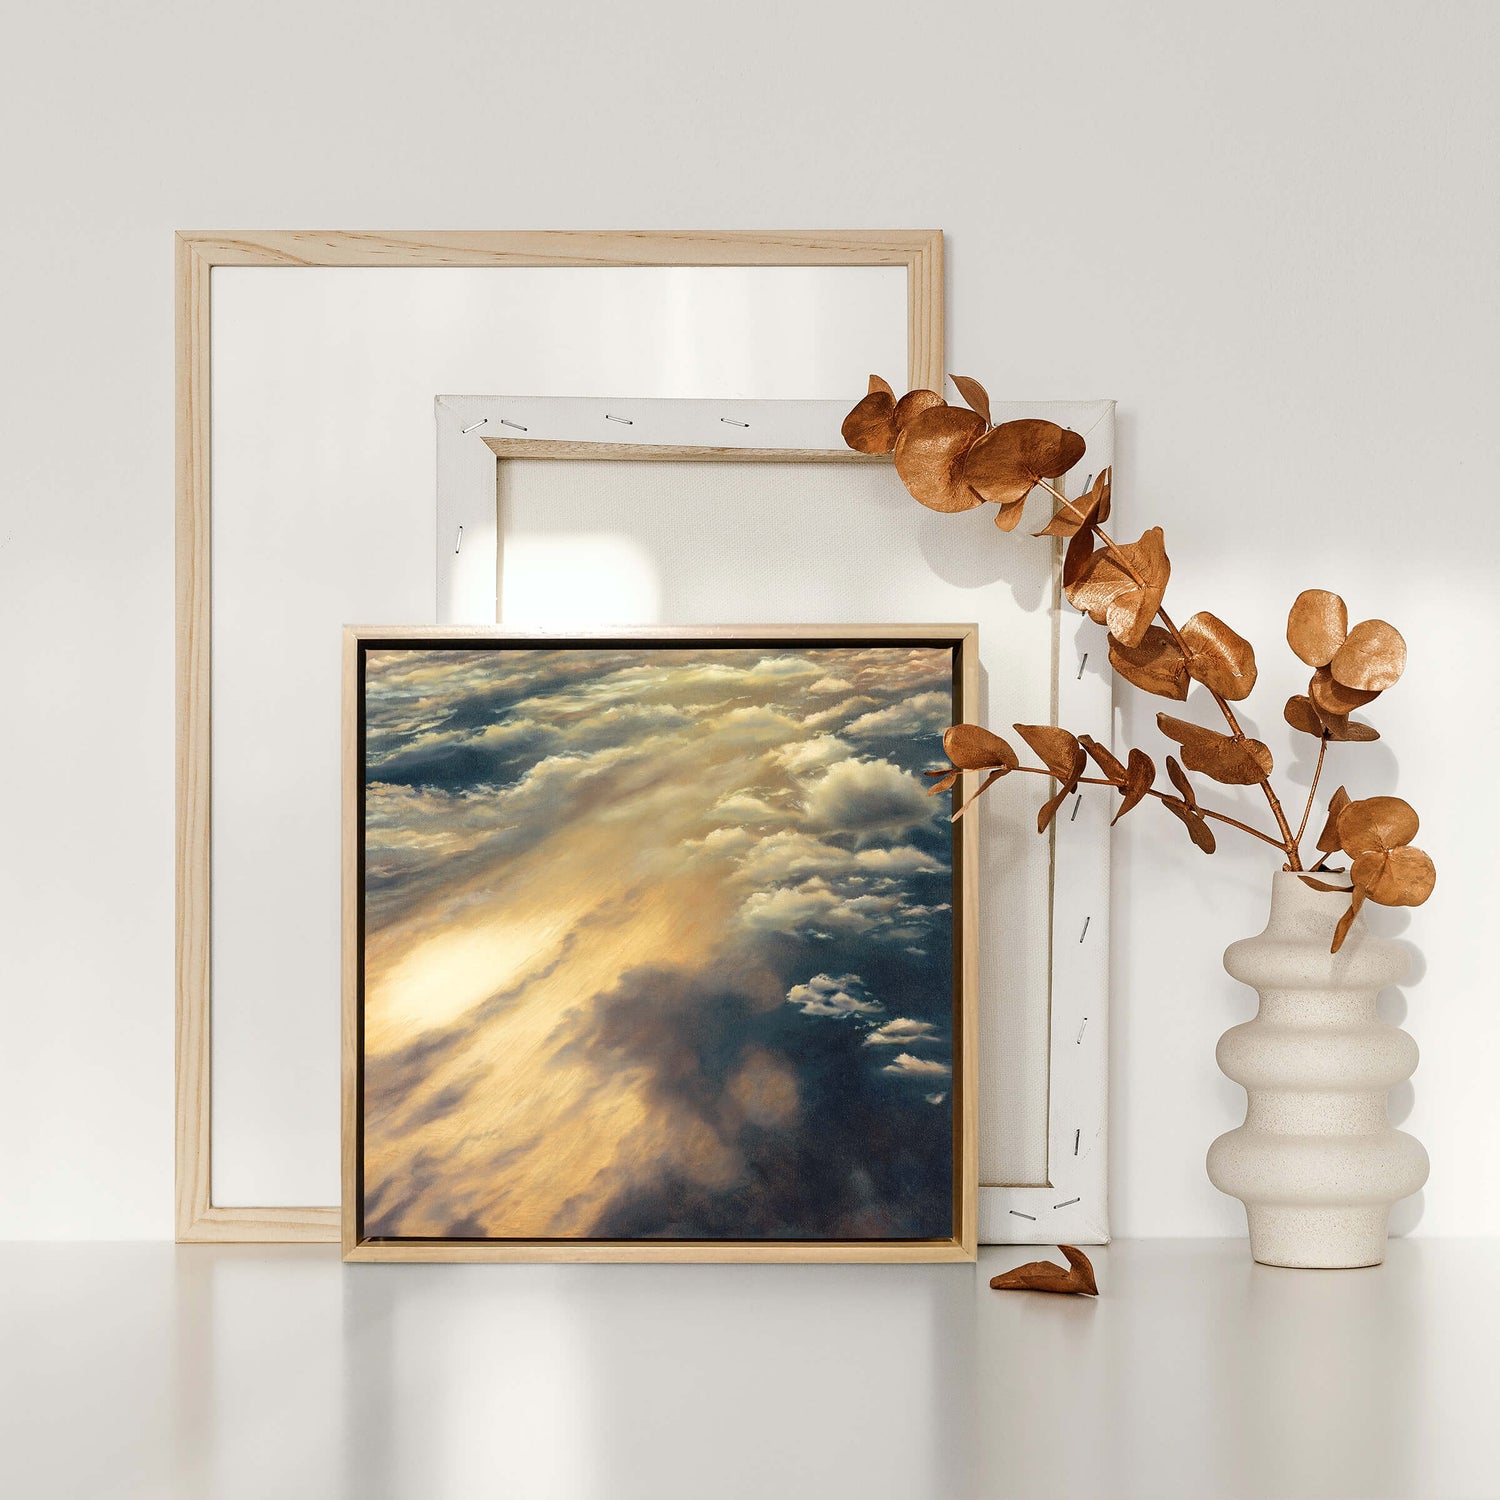 Original art, titled Cloudland, painted in oil on canvas, by Australian artist, Hayley Byron. The painting is a depiction of a cloudscape, from an aerial viewpoint. This image features the artwork in-situ, with stacked art canvasses, and a ceramic vase.